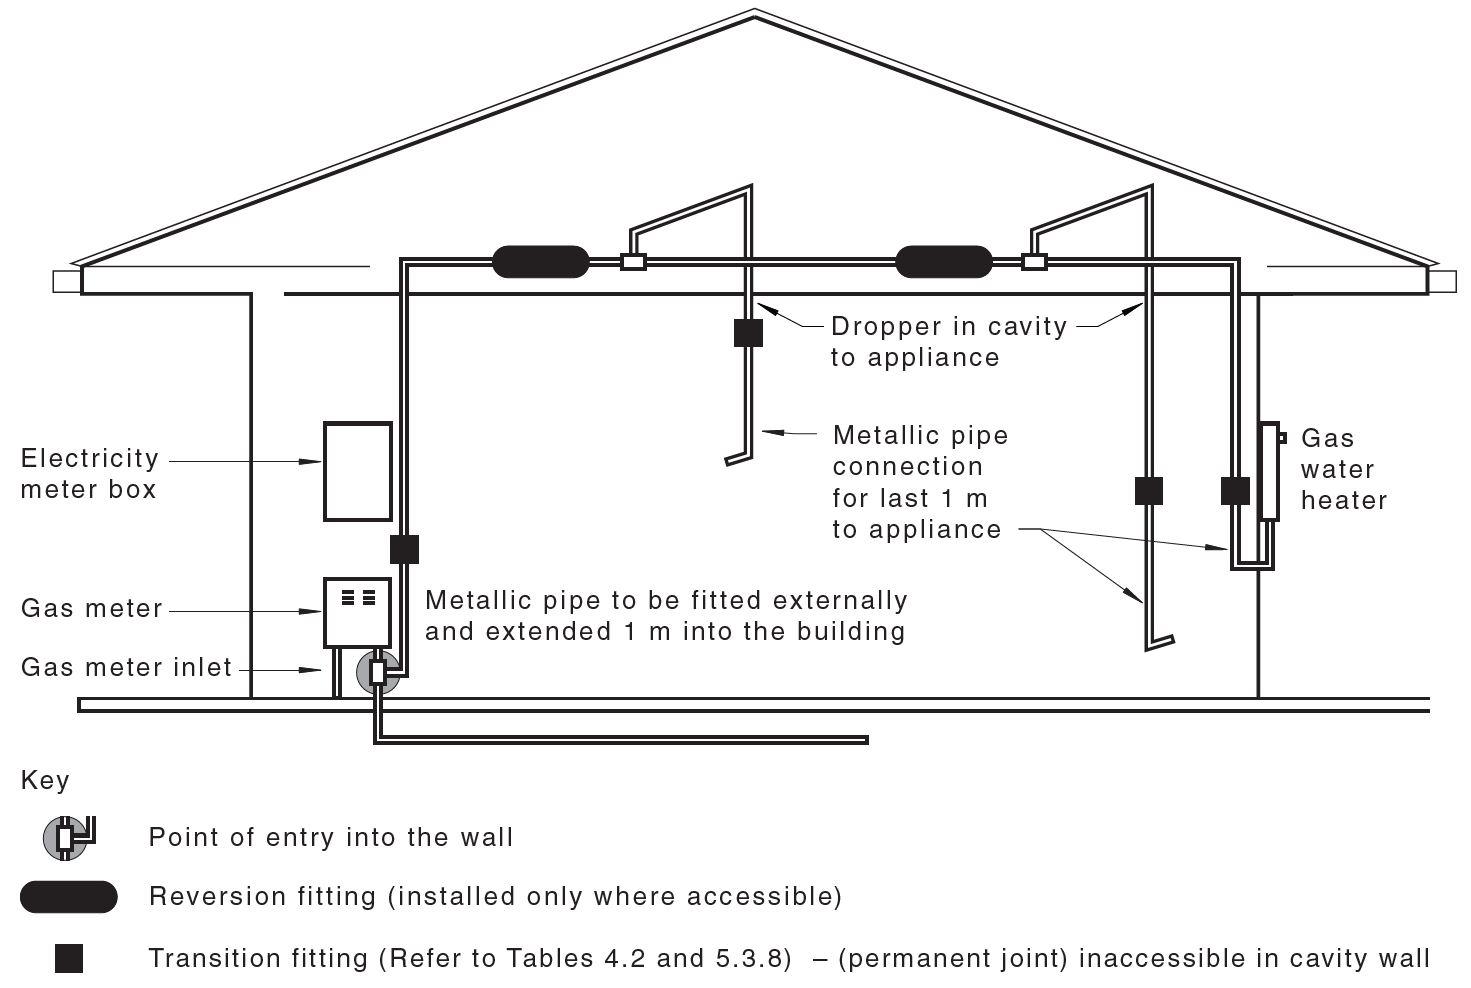 Diagram example of reversion fittings installed in a multilayer piping system